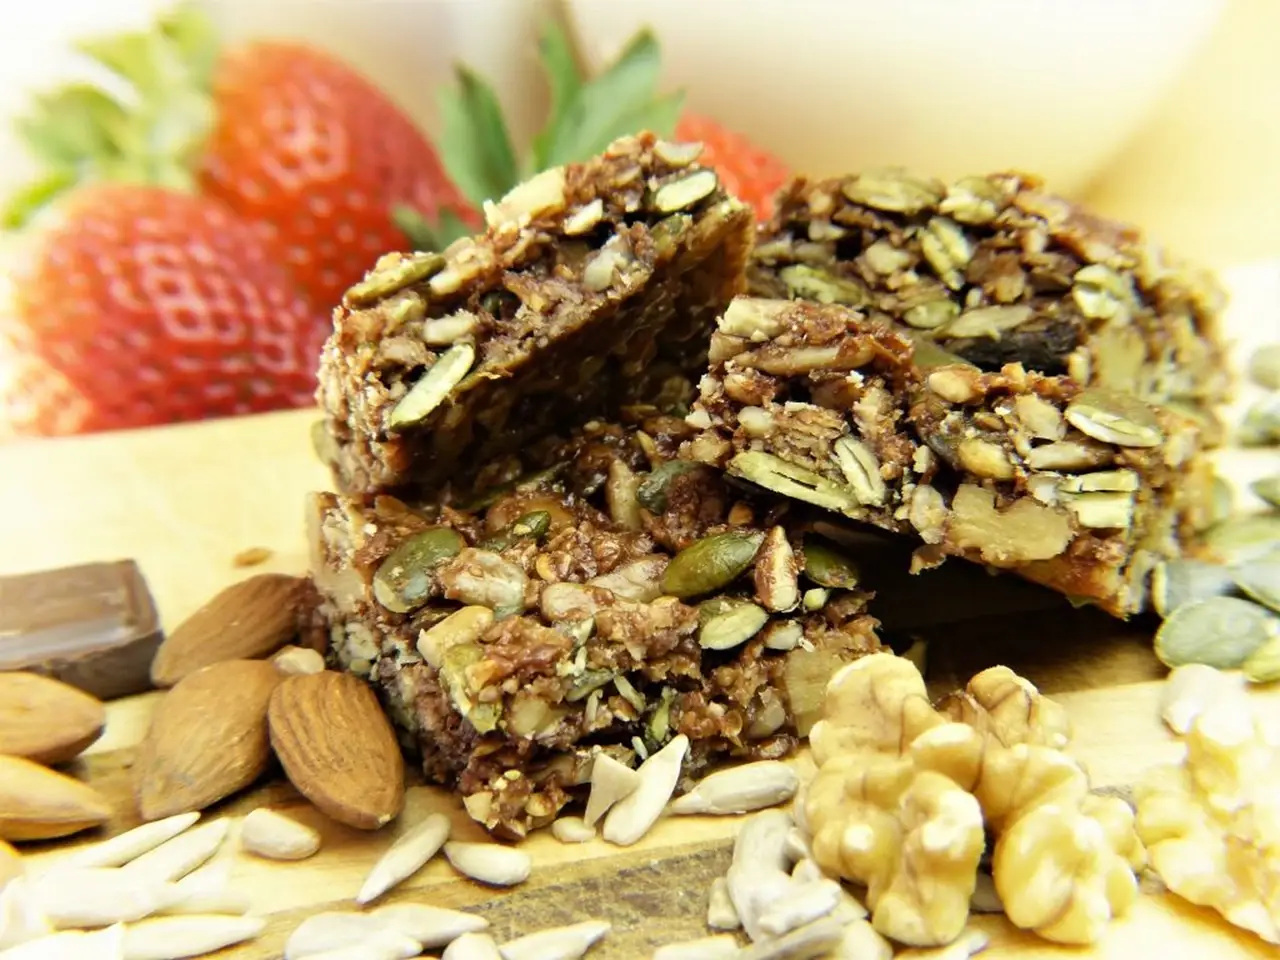 Gluten-free brownies filled with nuts and seeds